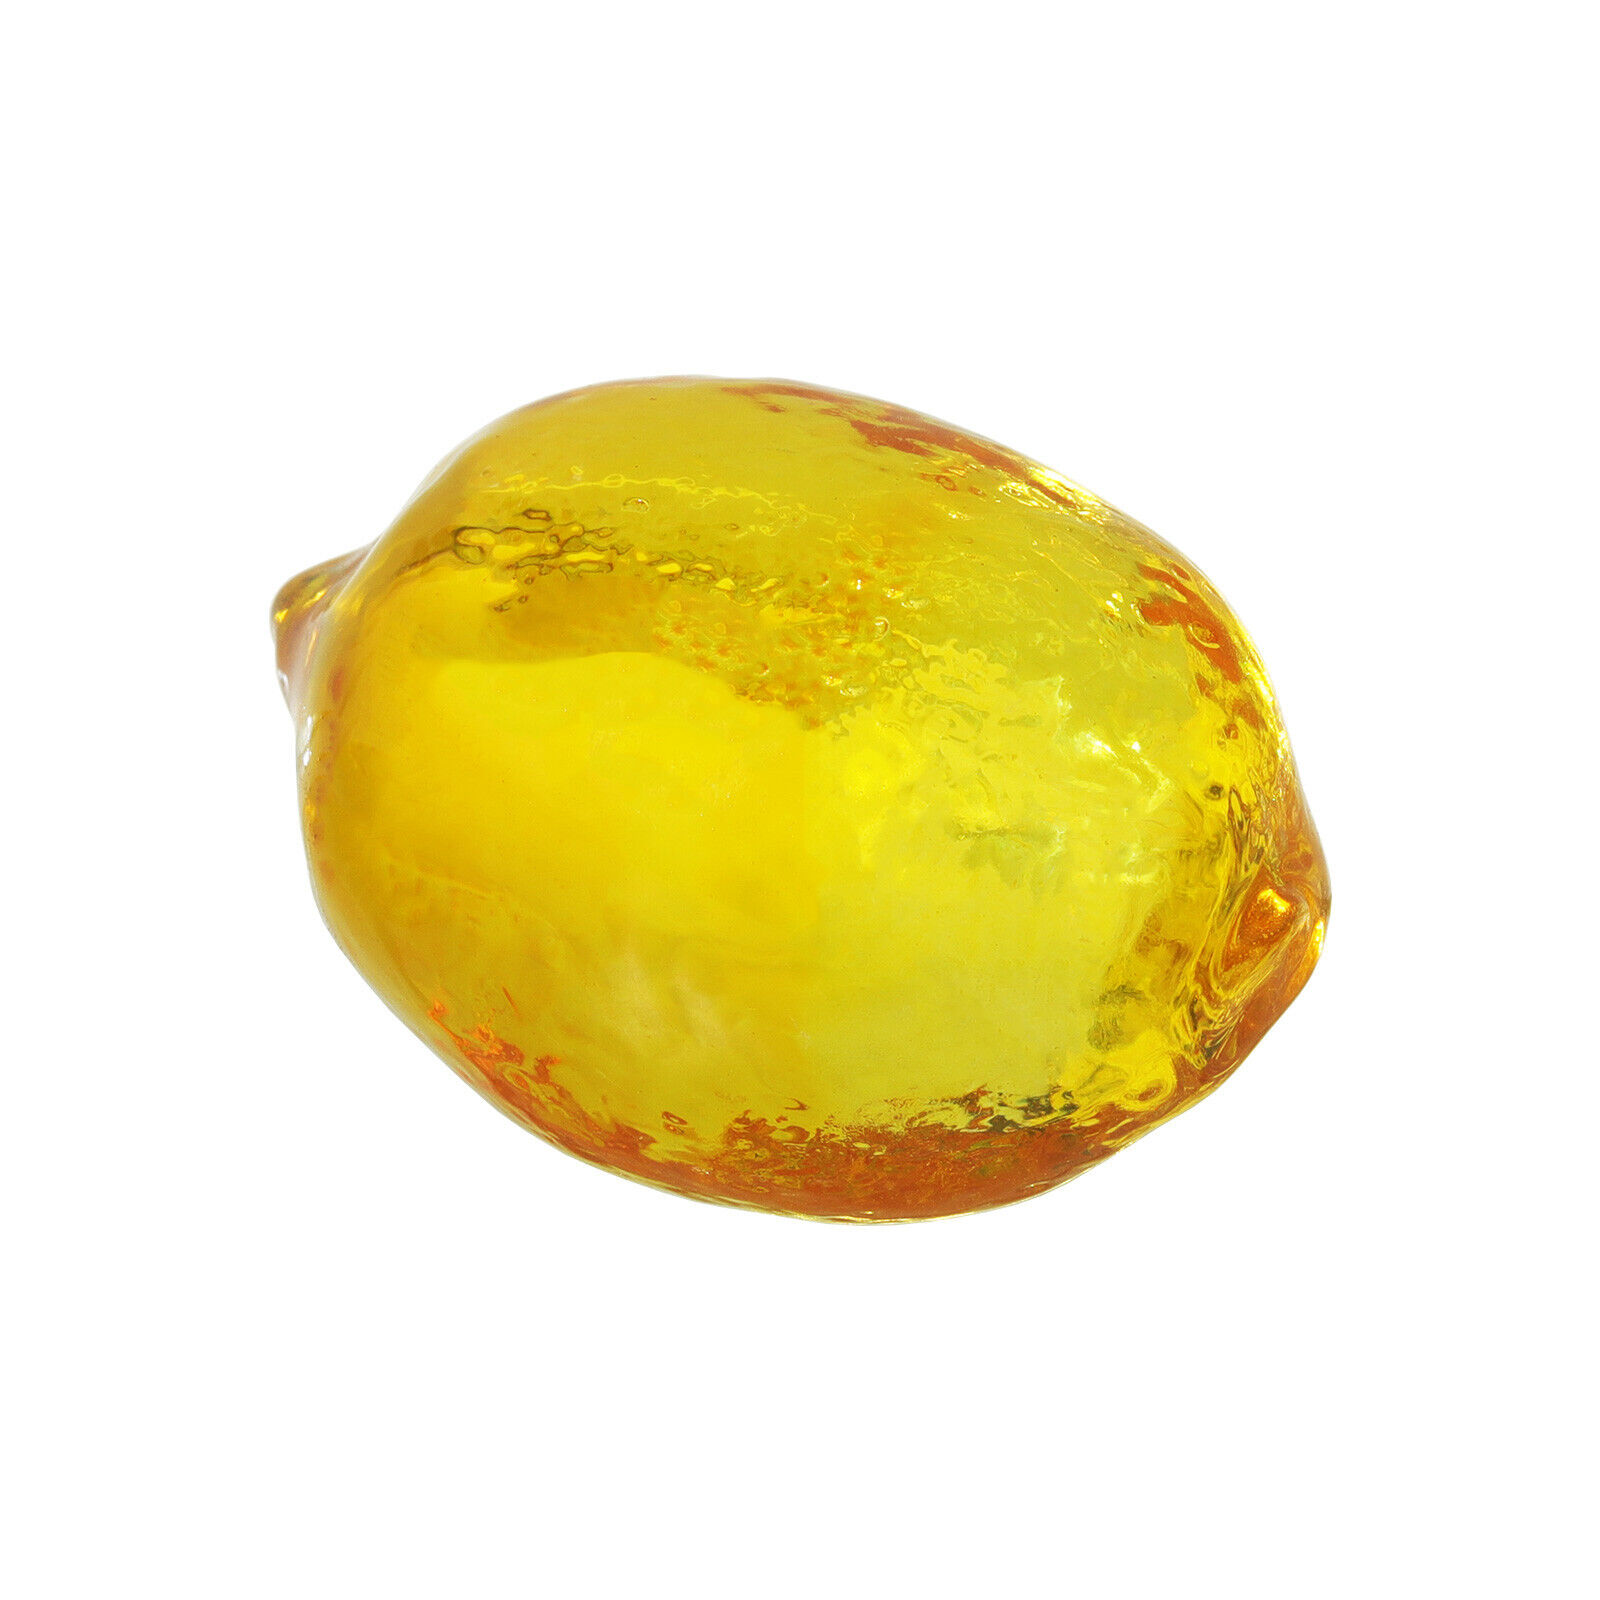 Crystal Lemon Figurine Collectible Glass Fruit Decorative Ornament Tabletop Gift